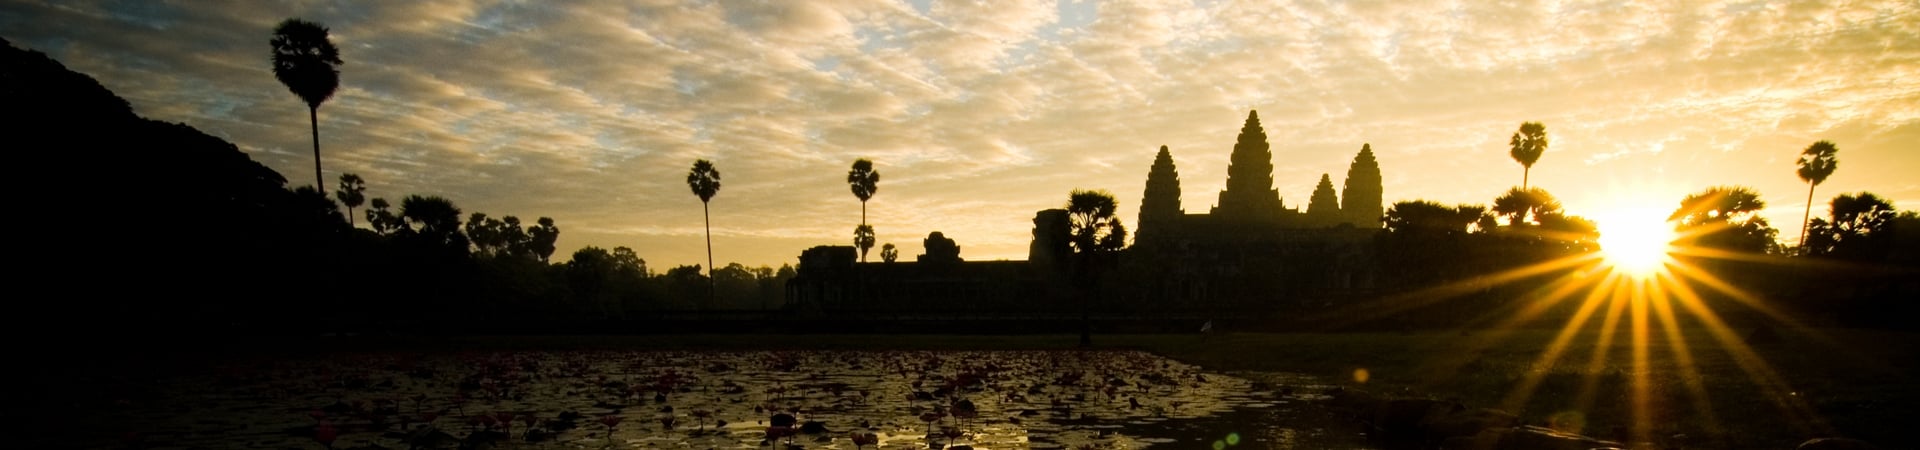 Image of Angkor, A Photographer’s Paradise